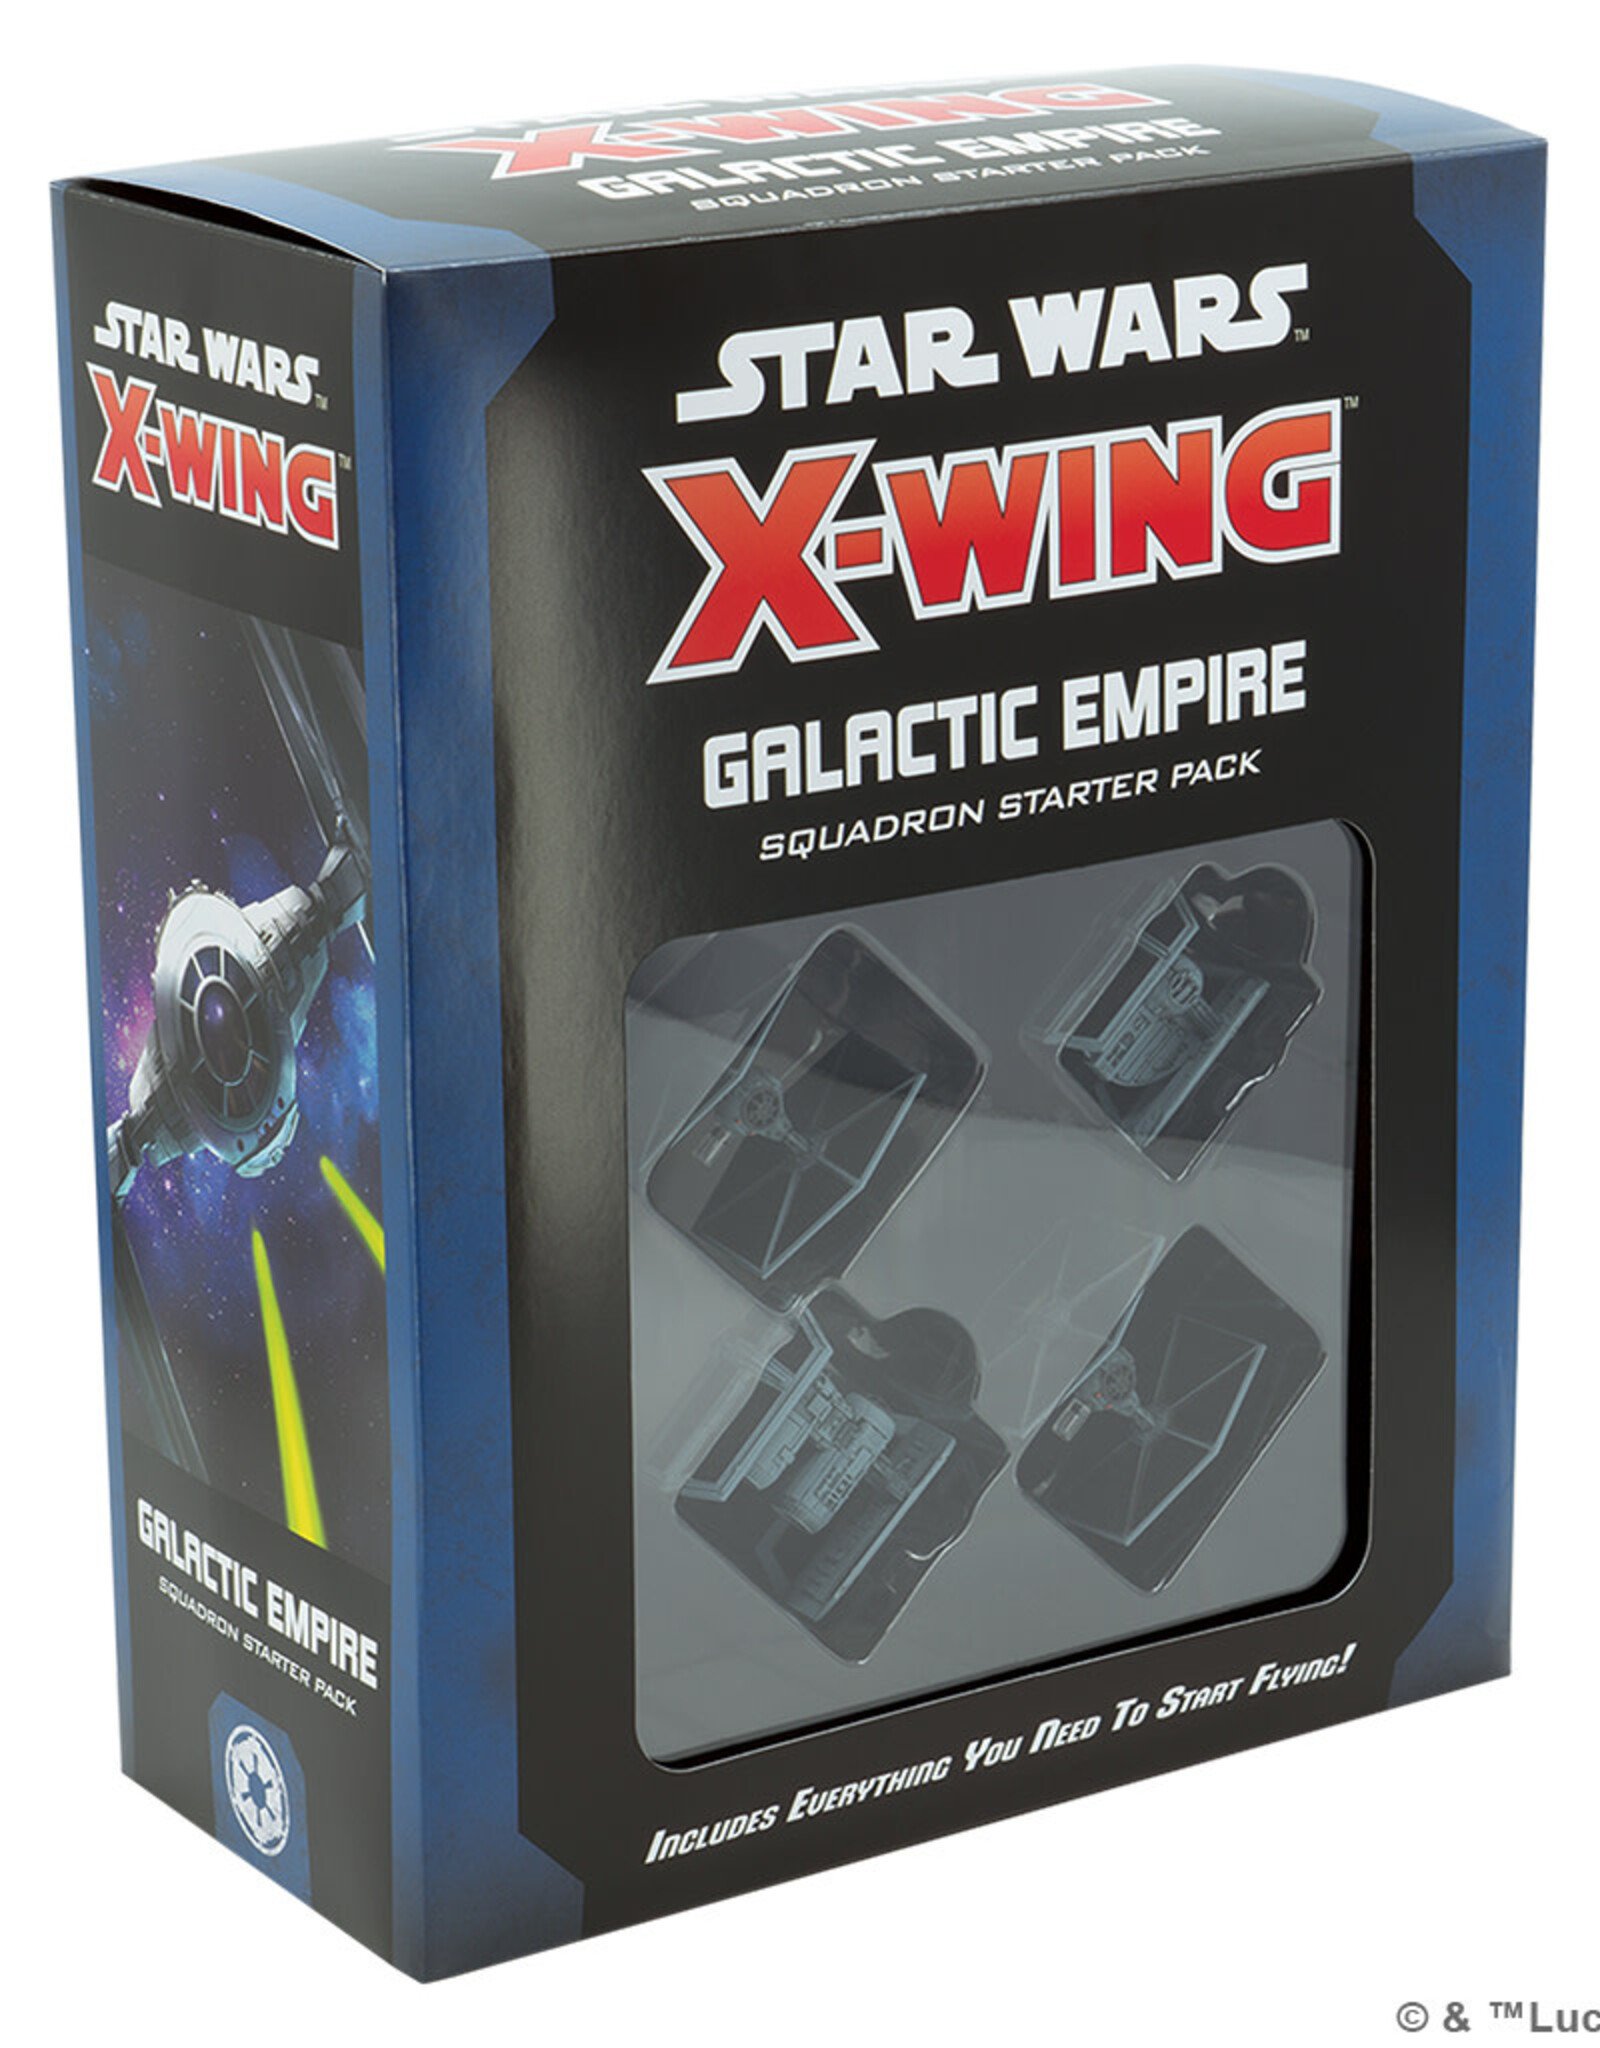 FFG Star Wars X-Wing 2.0: Galactic Empire Squadron Starter Pack